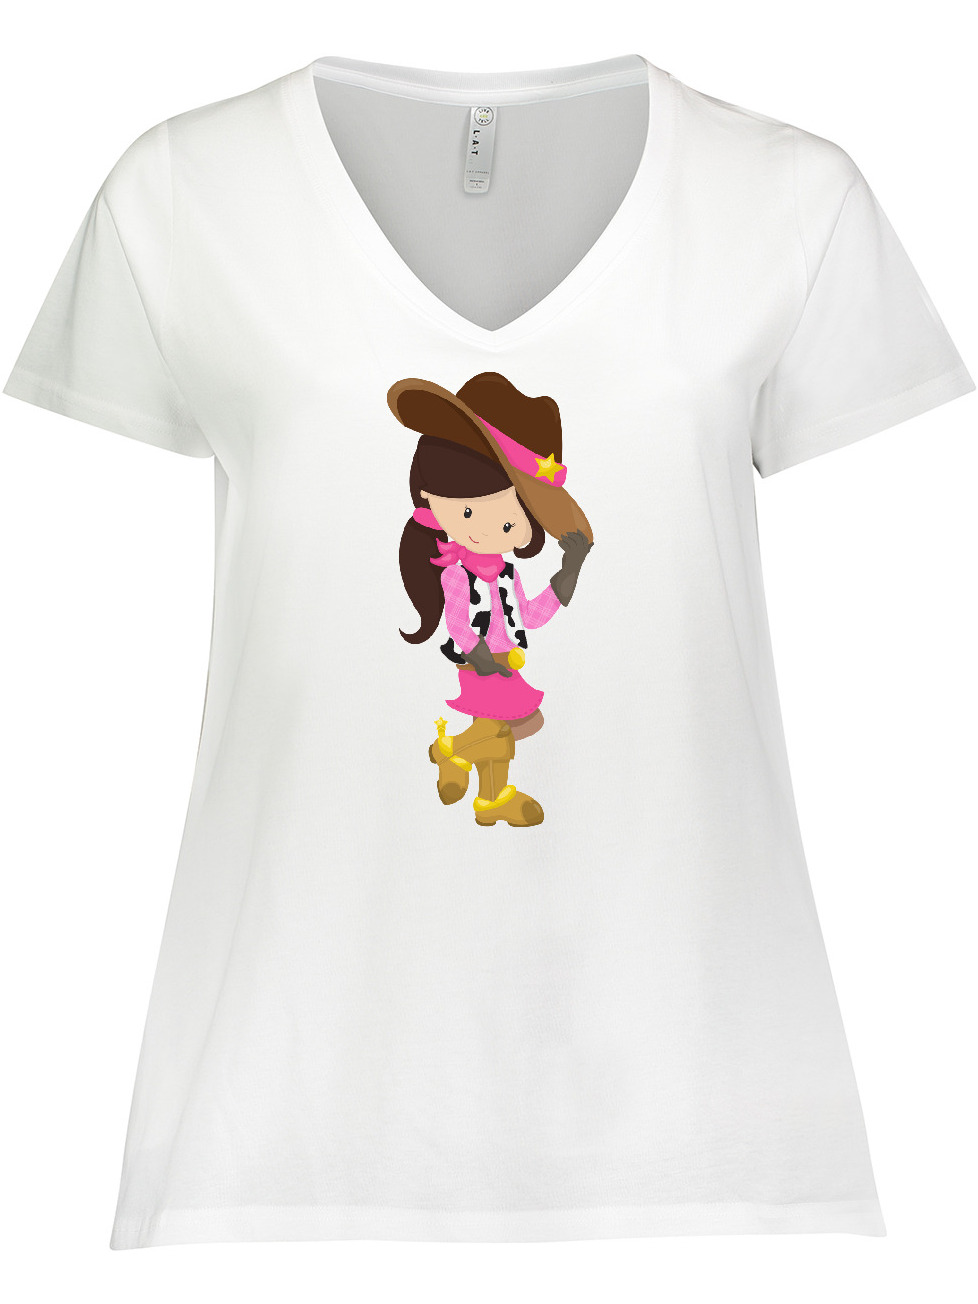 Inktastic Cowboy Girl, Girl With Cowboy Hat, Brown Hair Women's Plus Size V-Neck T-Shirt - image 1 of 4